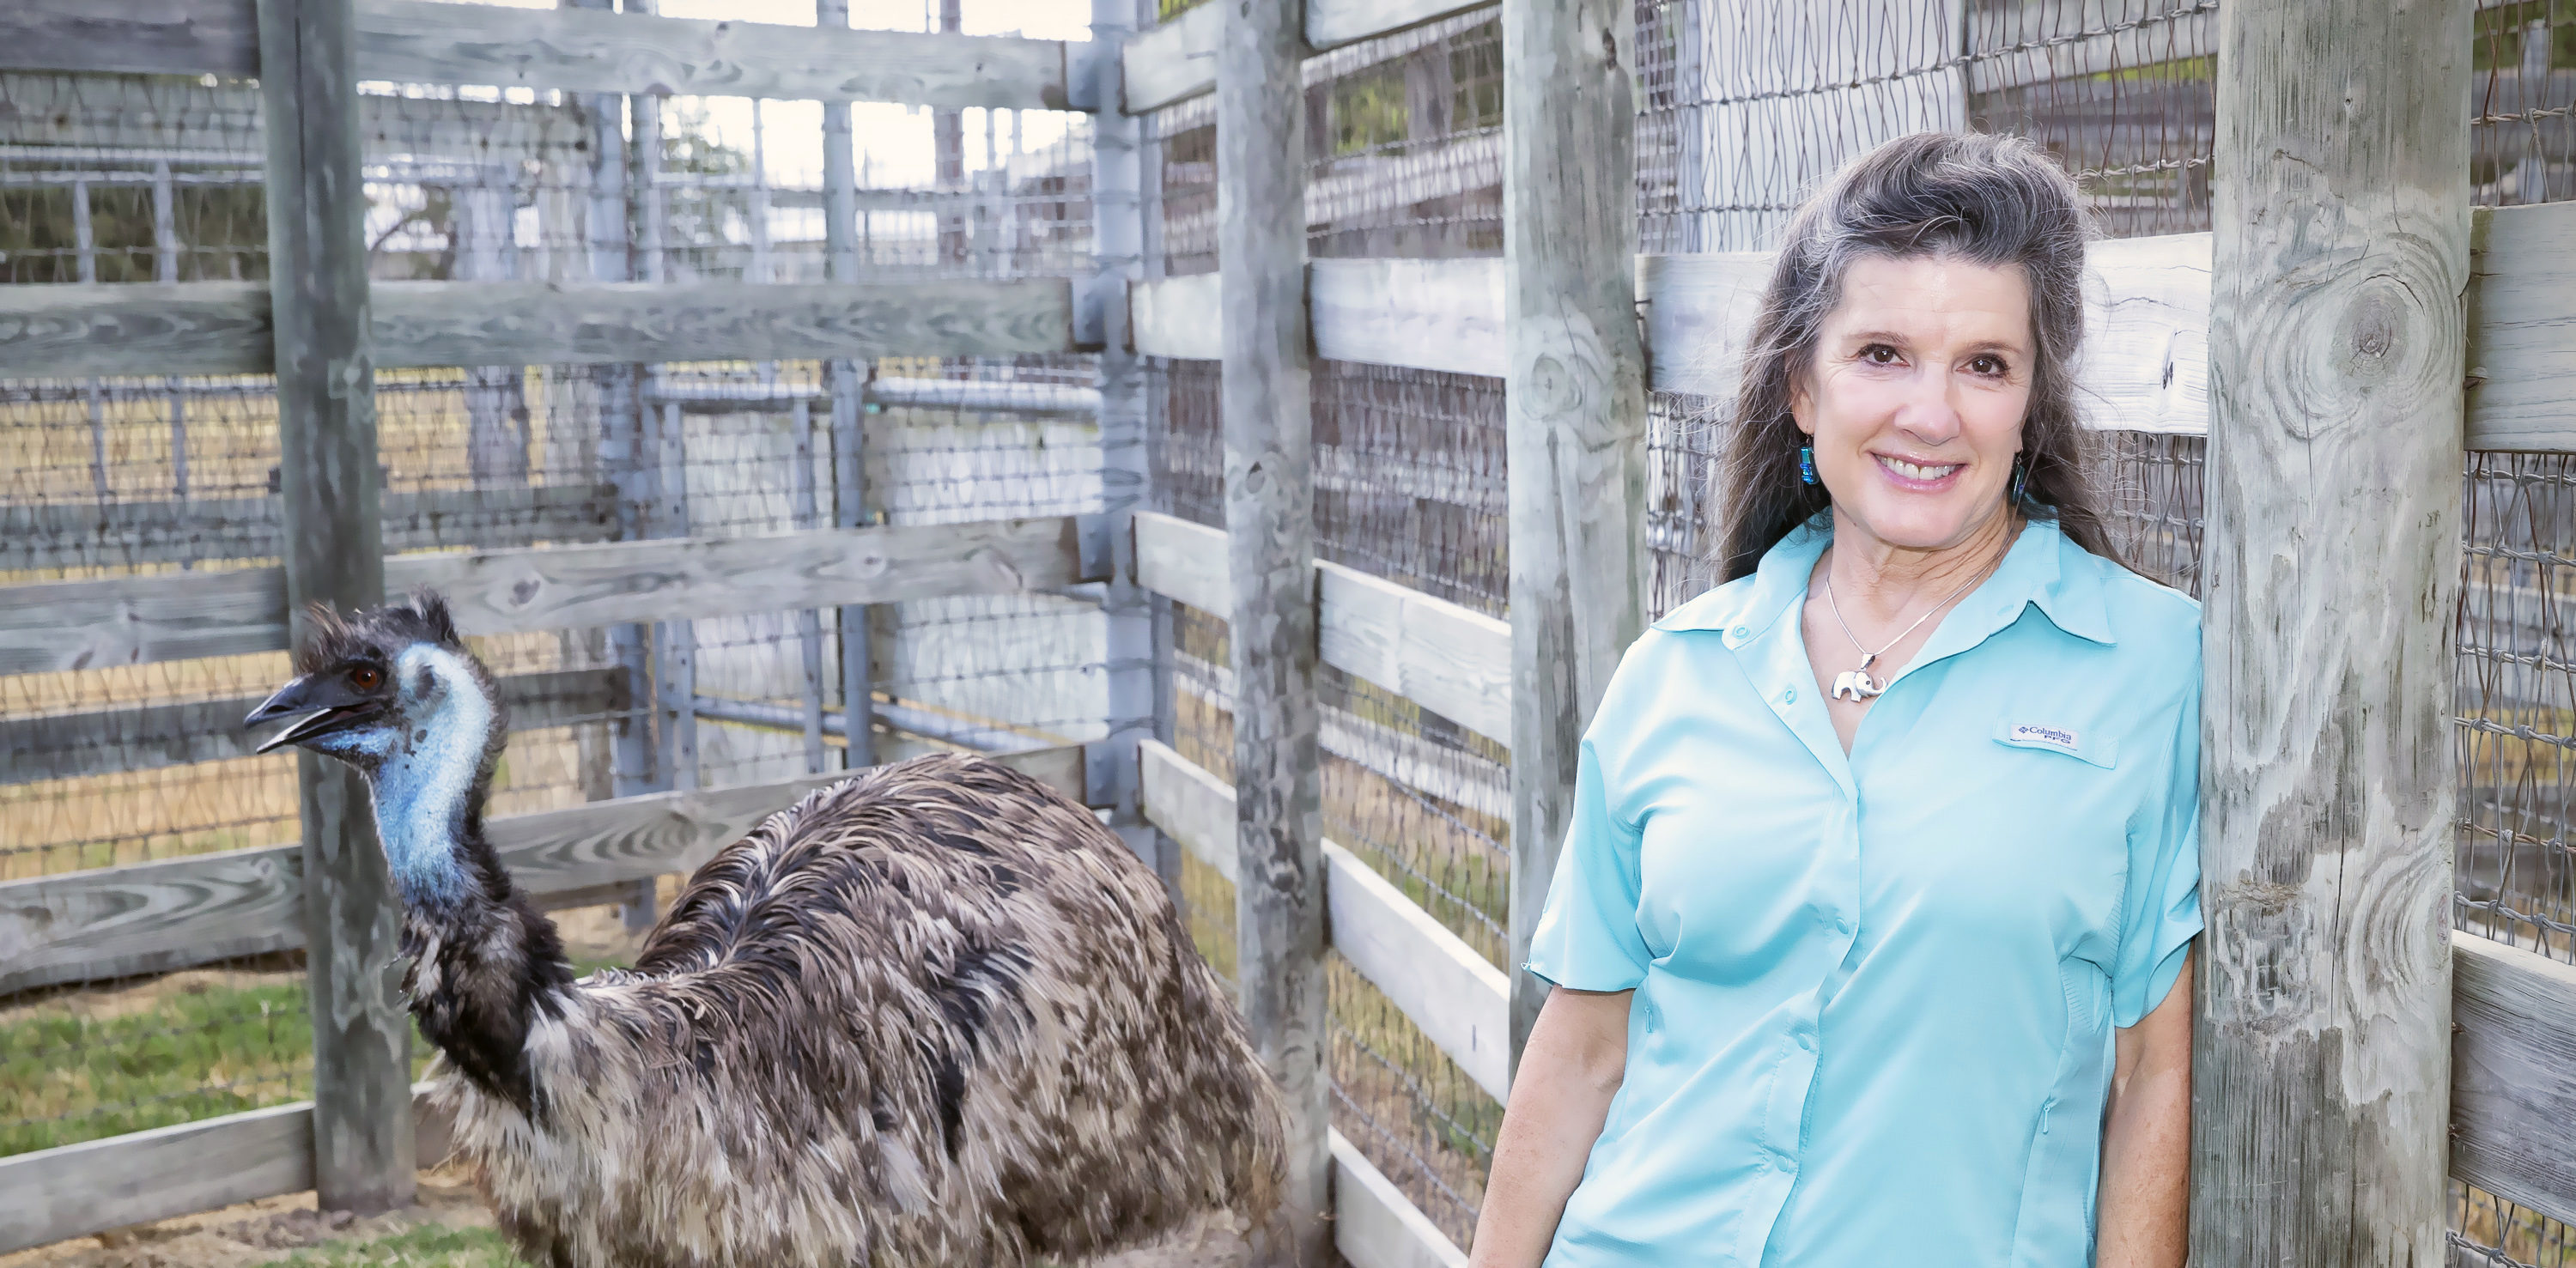 Dr. Alice Blue-McLendon, Center Director, visits with an emu at the Winnie Carter Wildlife Center